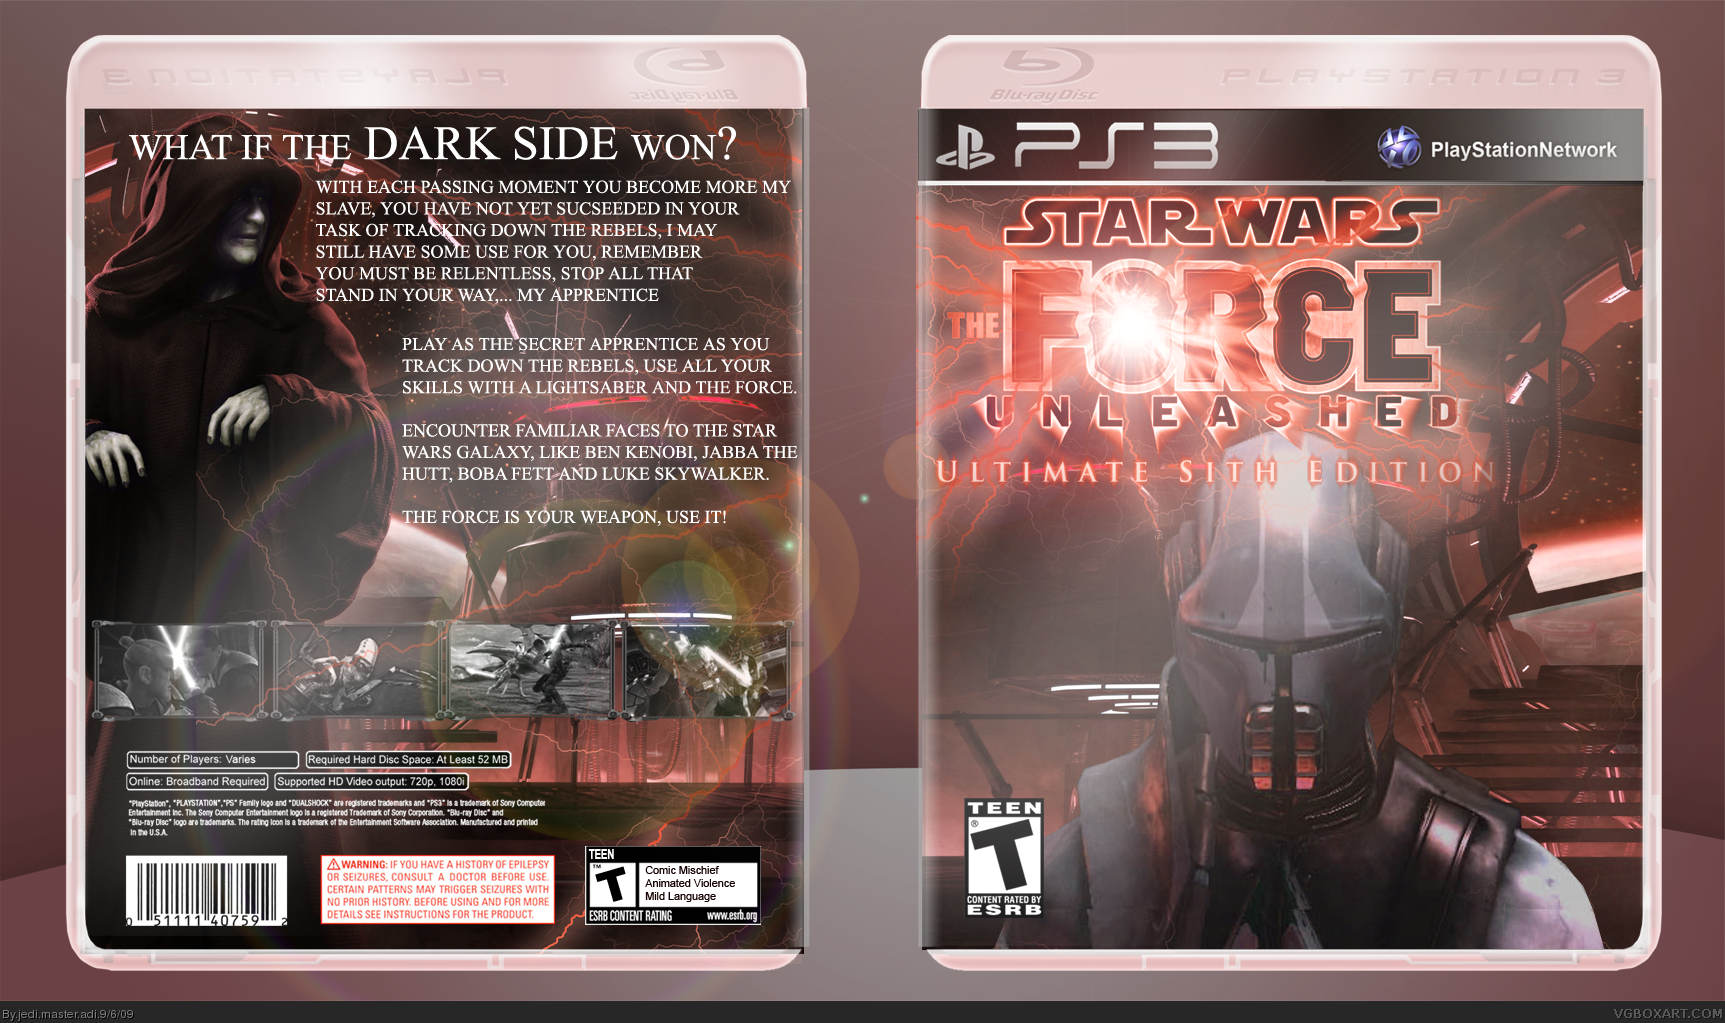 Star wars the force unleashed коды. Диск ps3 Star Wars the Force unleashed. Звёздные войны the Force unleashed 3. Star Wars Force ps2. Star Wars the Force unleashed ps2 обложка.